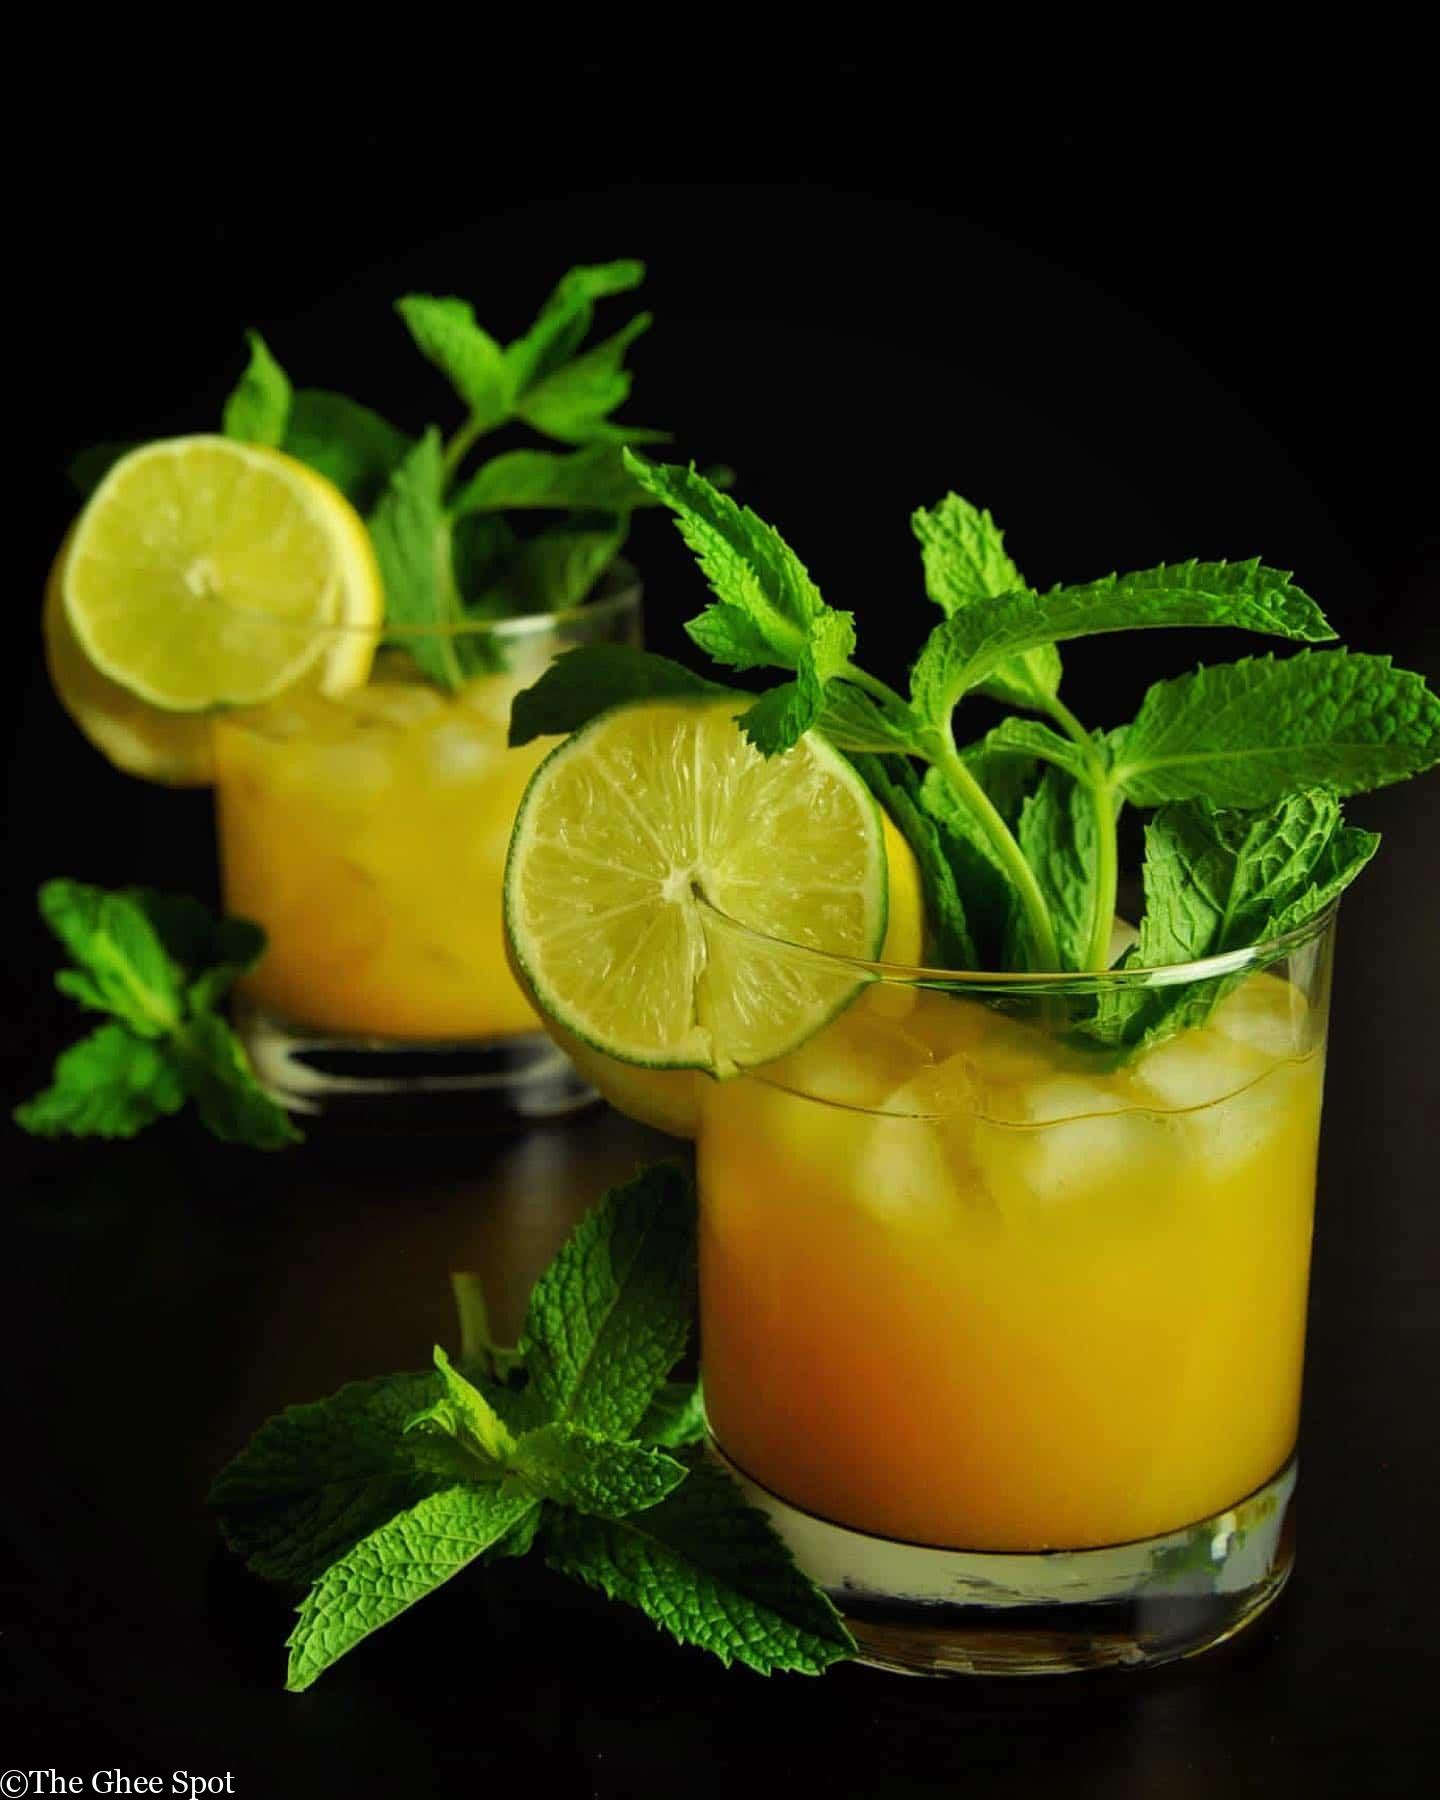 It’s Sunday so why not day drink. And by day drink I really mean 9:30 am drinking. This delightful Hunka Burnin Mango Love features mango, yuzu, habanero, with coriander, spiced rum, and ginger beer.

Thank you @the_delectable_kitchen and  @indianfusionkitchenrecipes for co-hosting #summerdrinksforall 

#thegheespot #cocktails #drinkstagram #mango